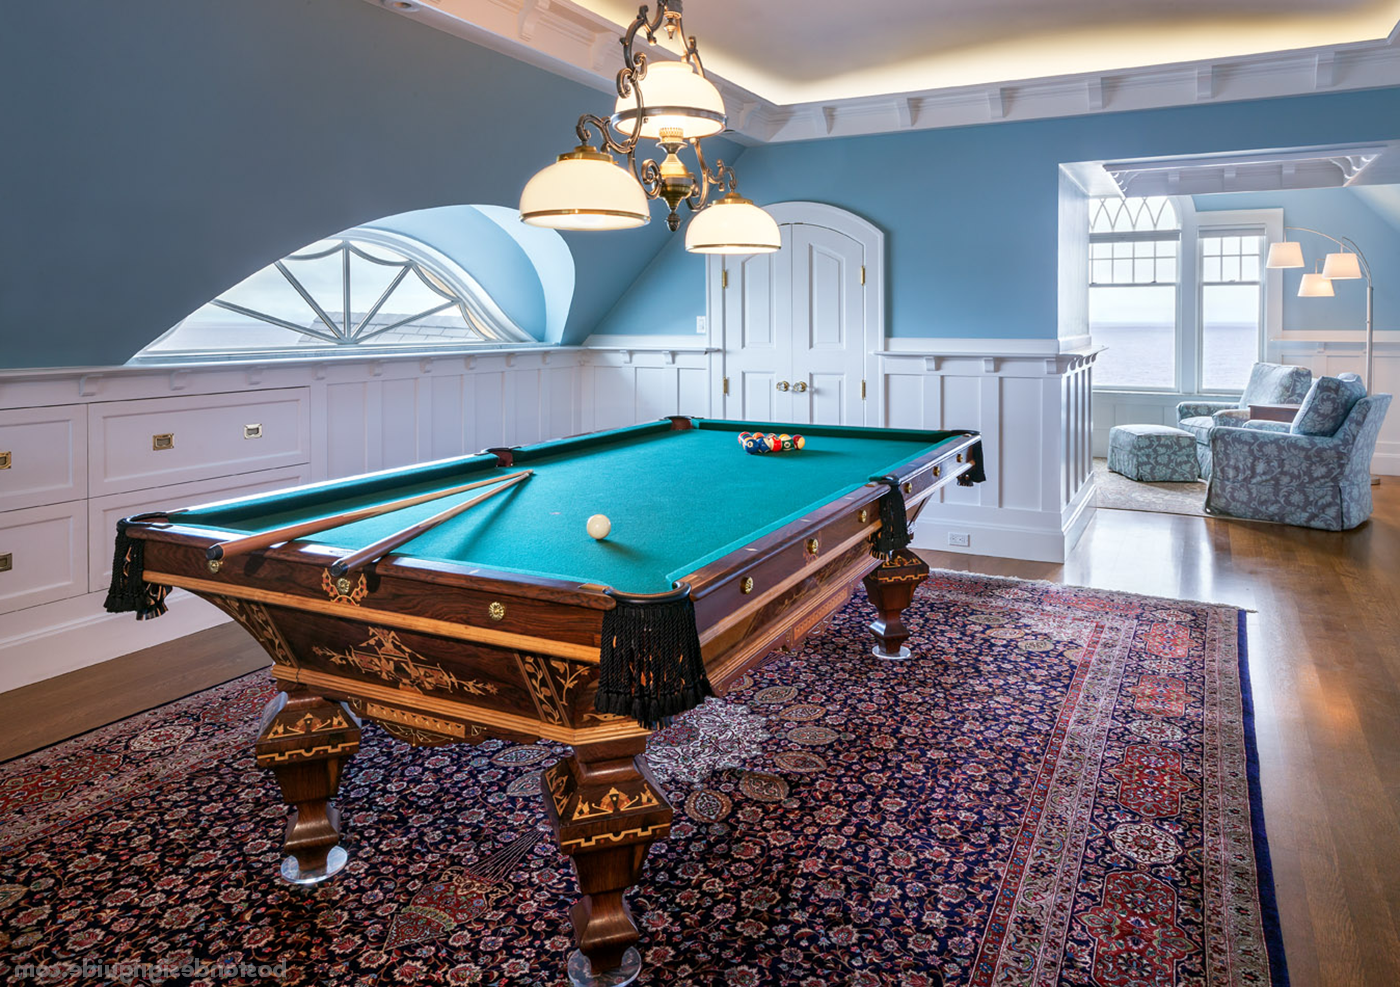 Restored antique pool table